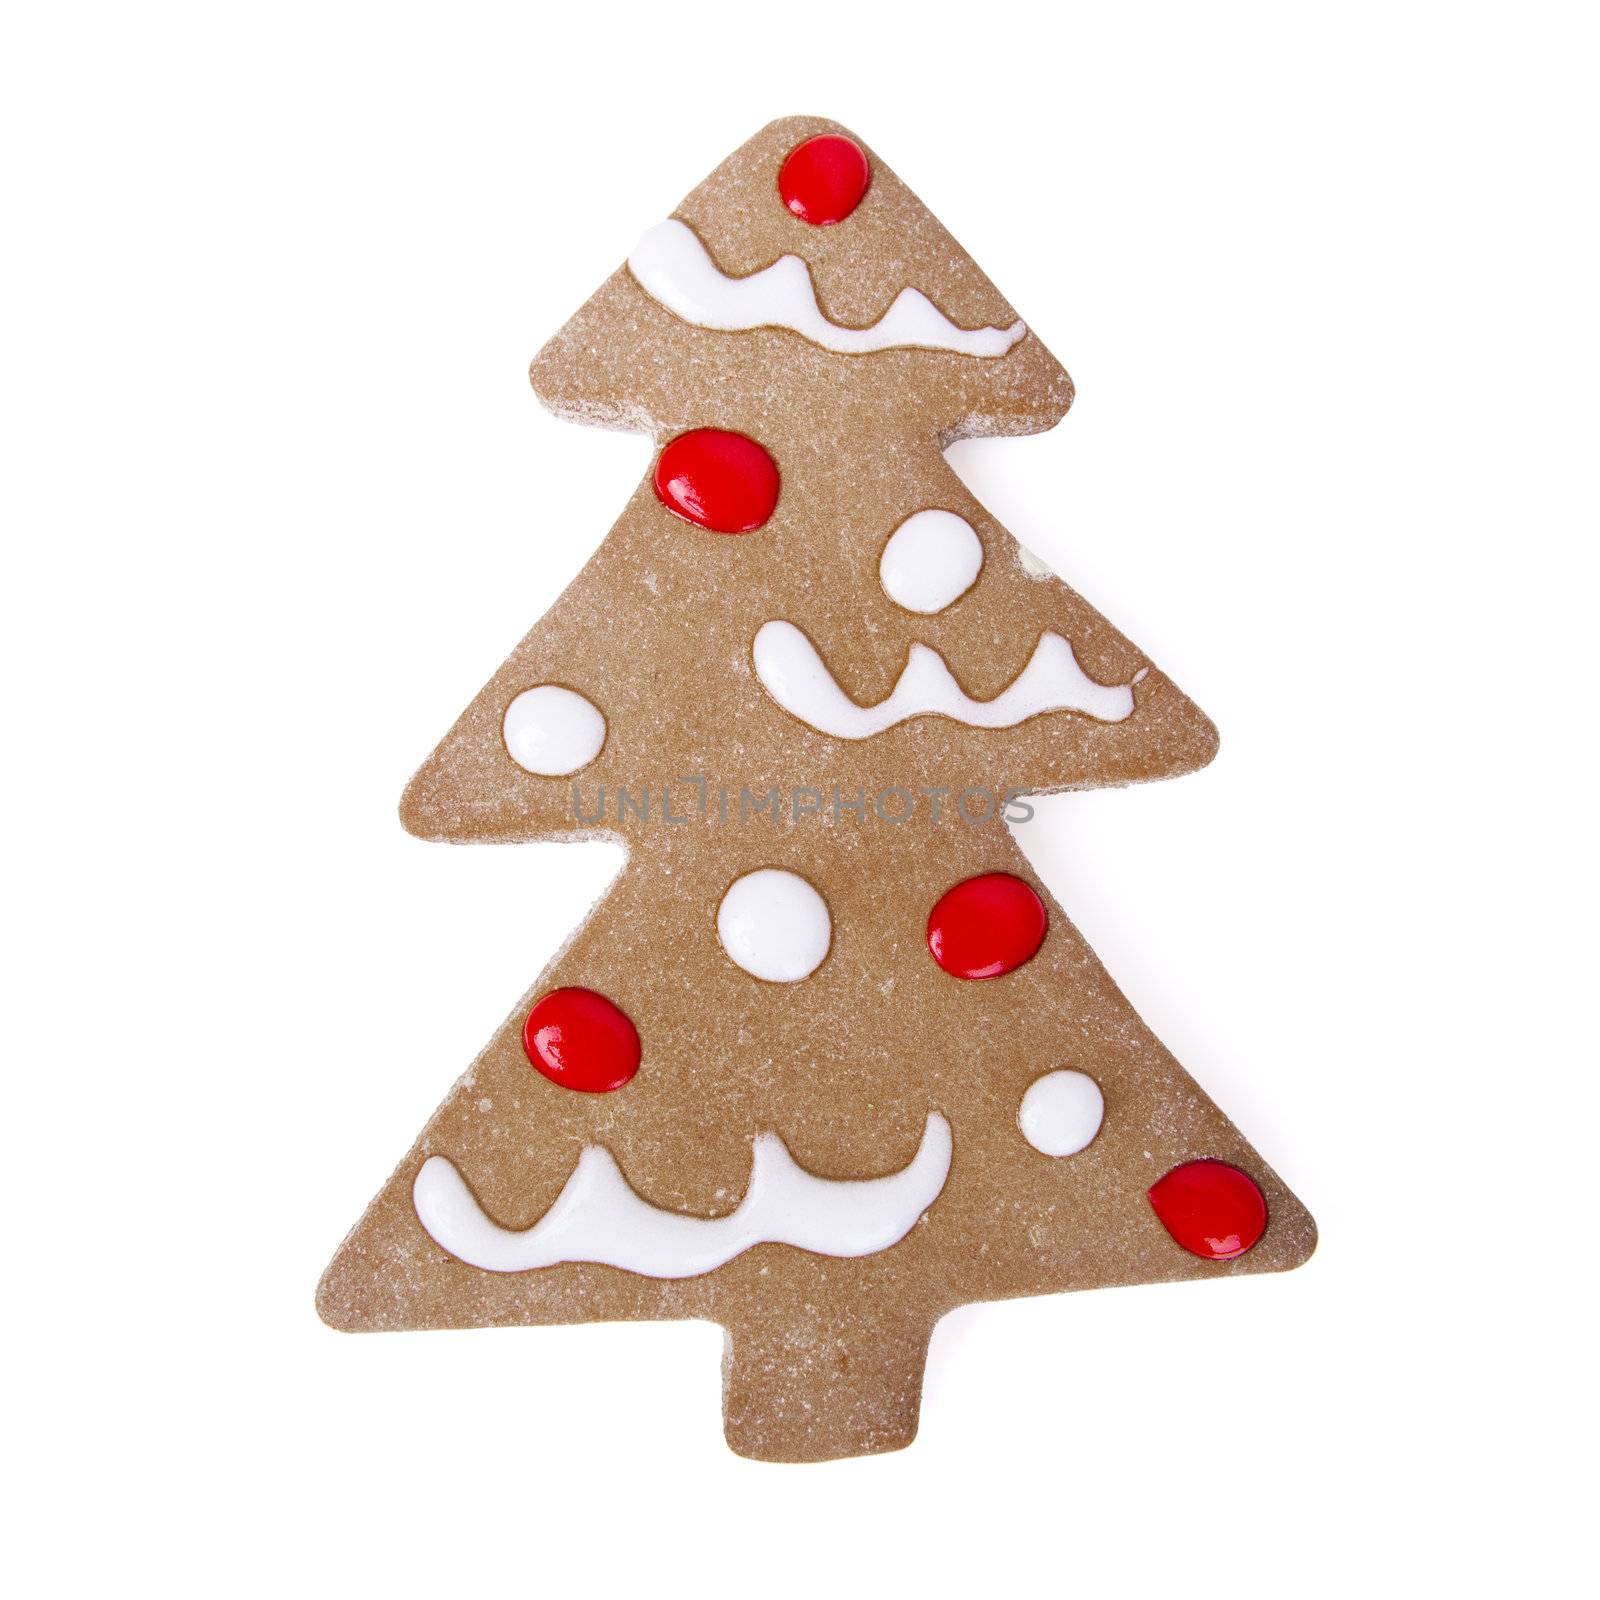 Homemade Gingerbread christmas cookies with a shape of a tree isolated on white